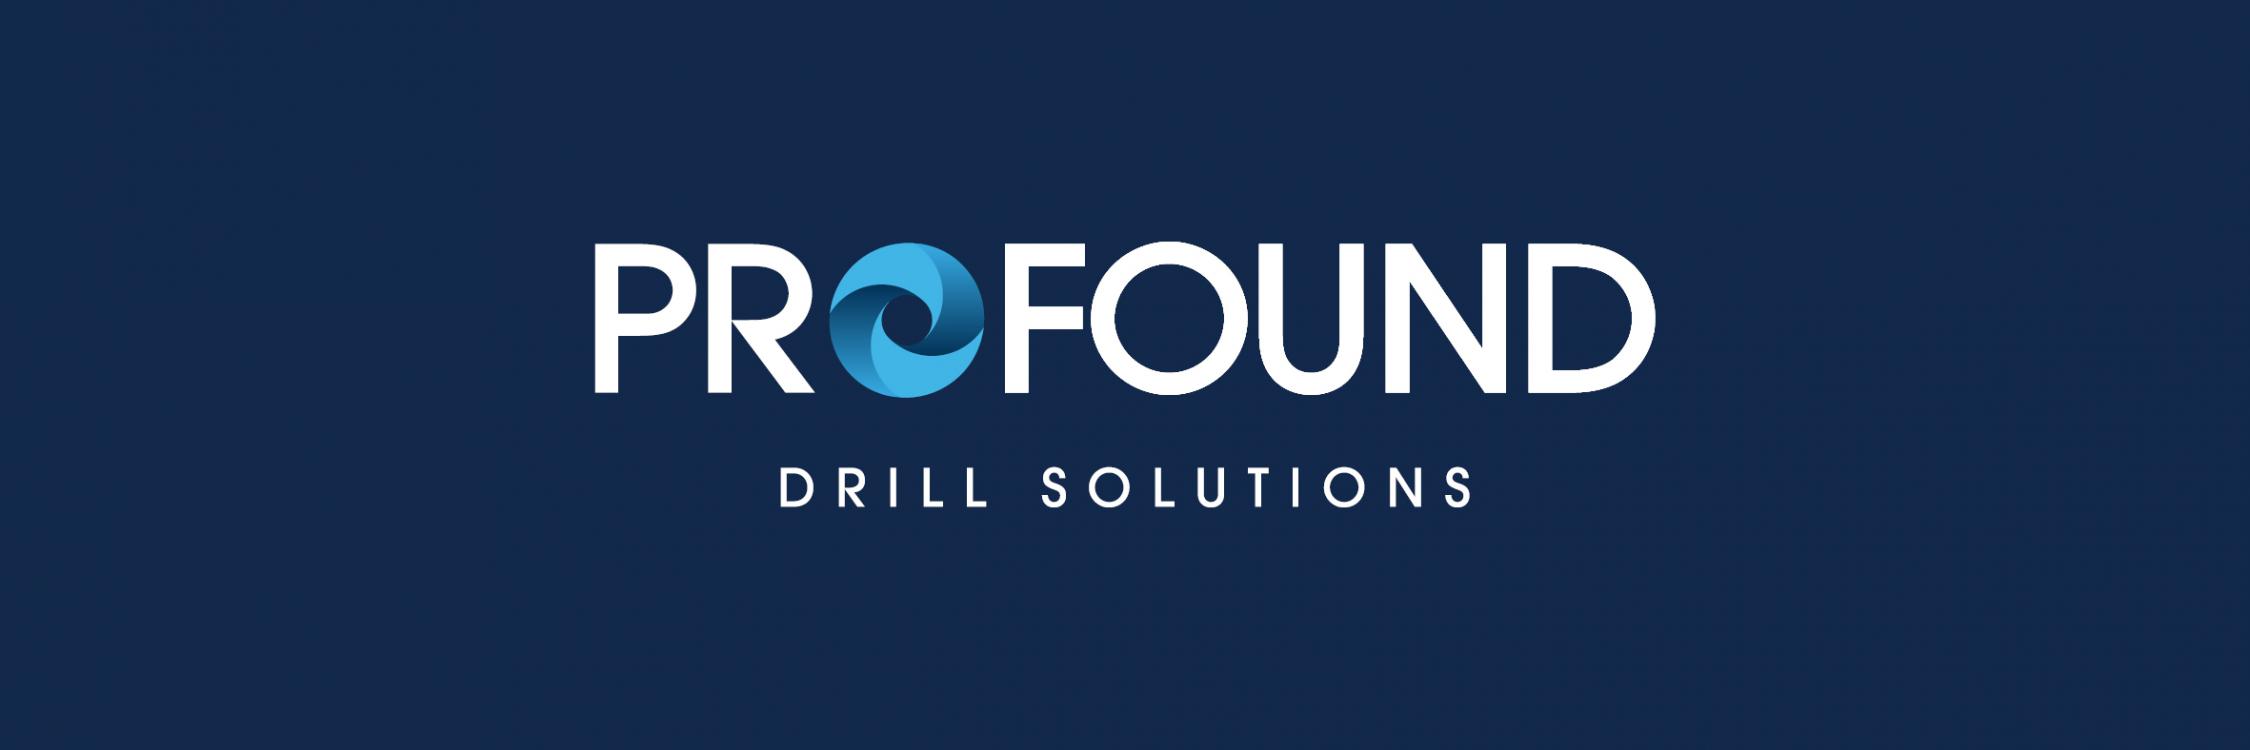 New logo ProFound Drill Solutions